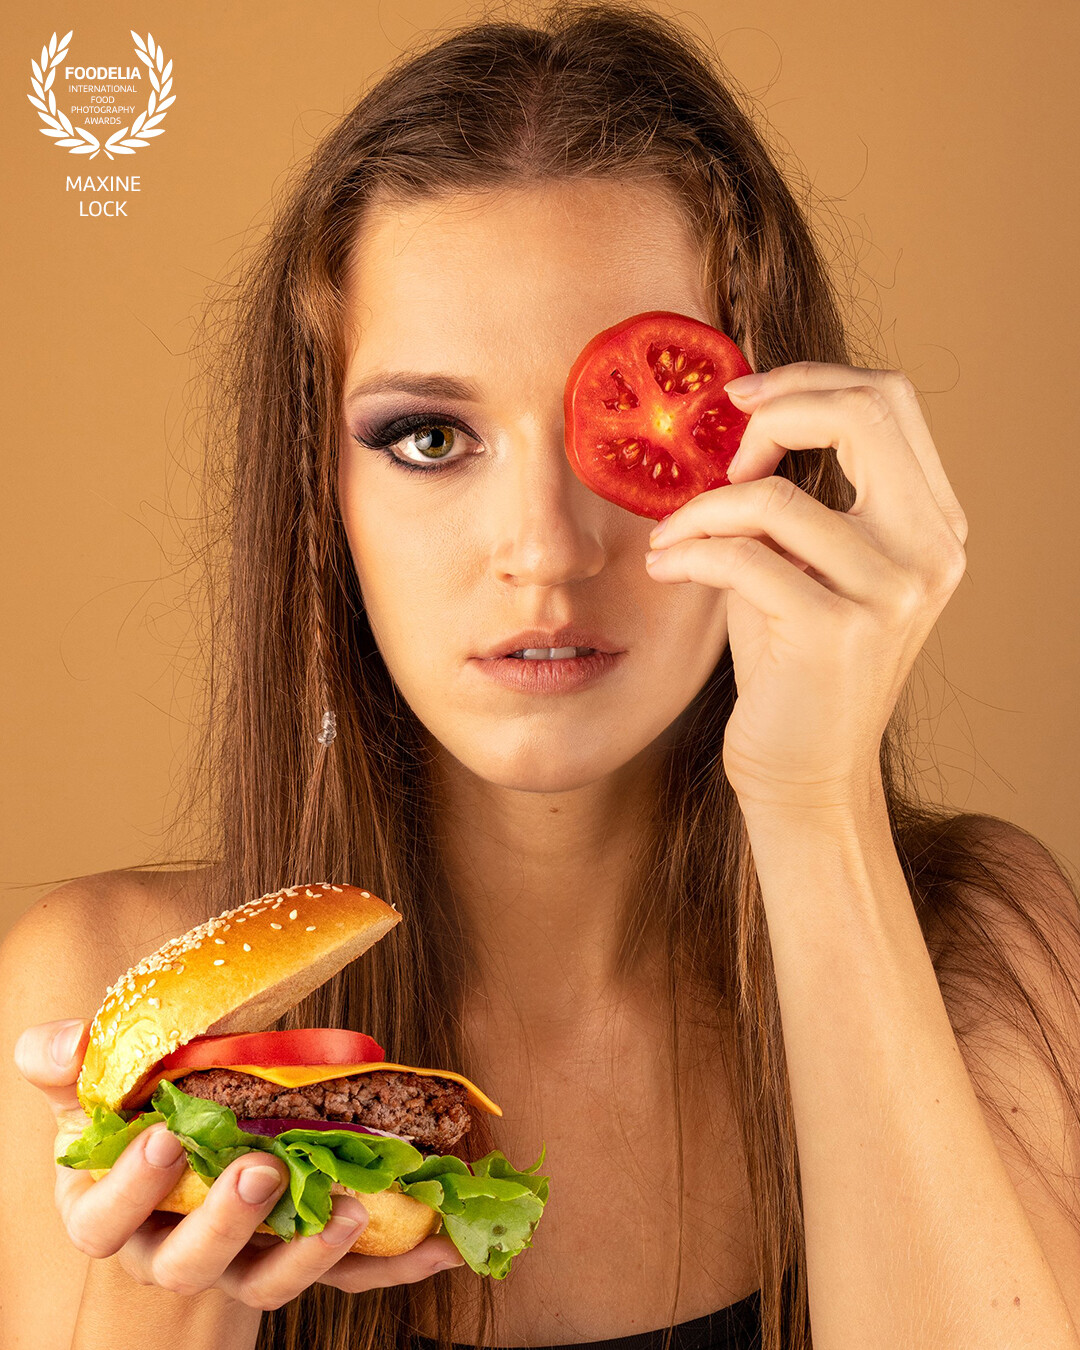 Model holding a burger with one hand, while the other hand is holding a tomato to her eye.